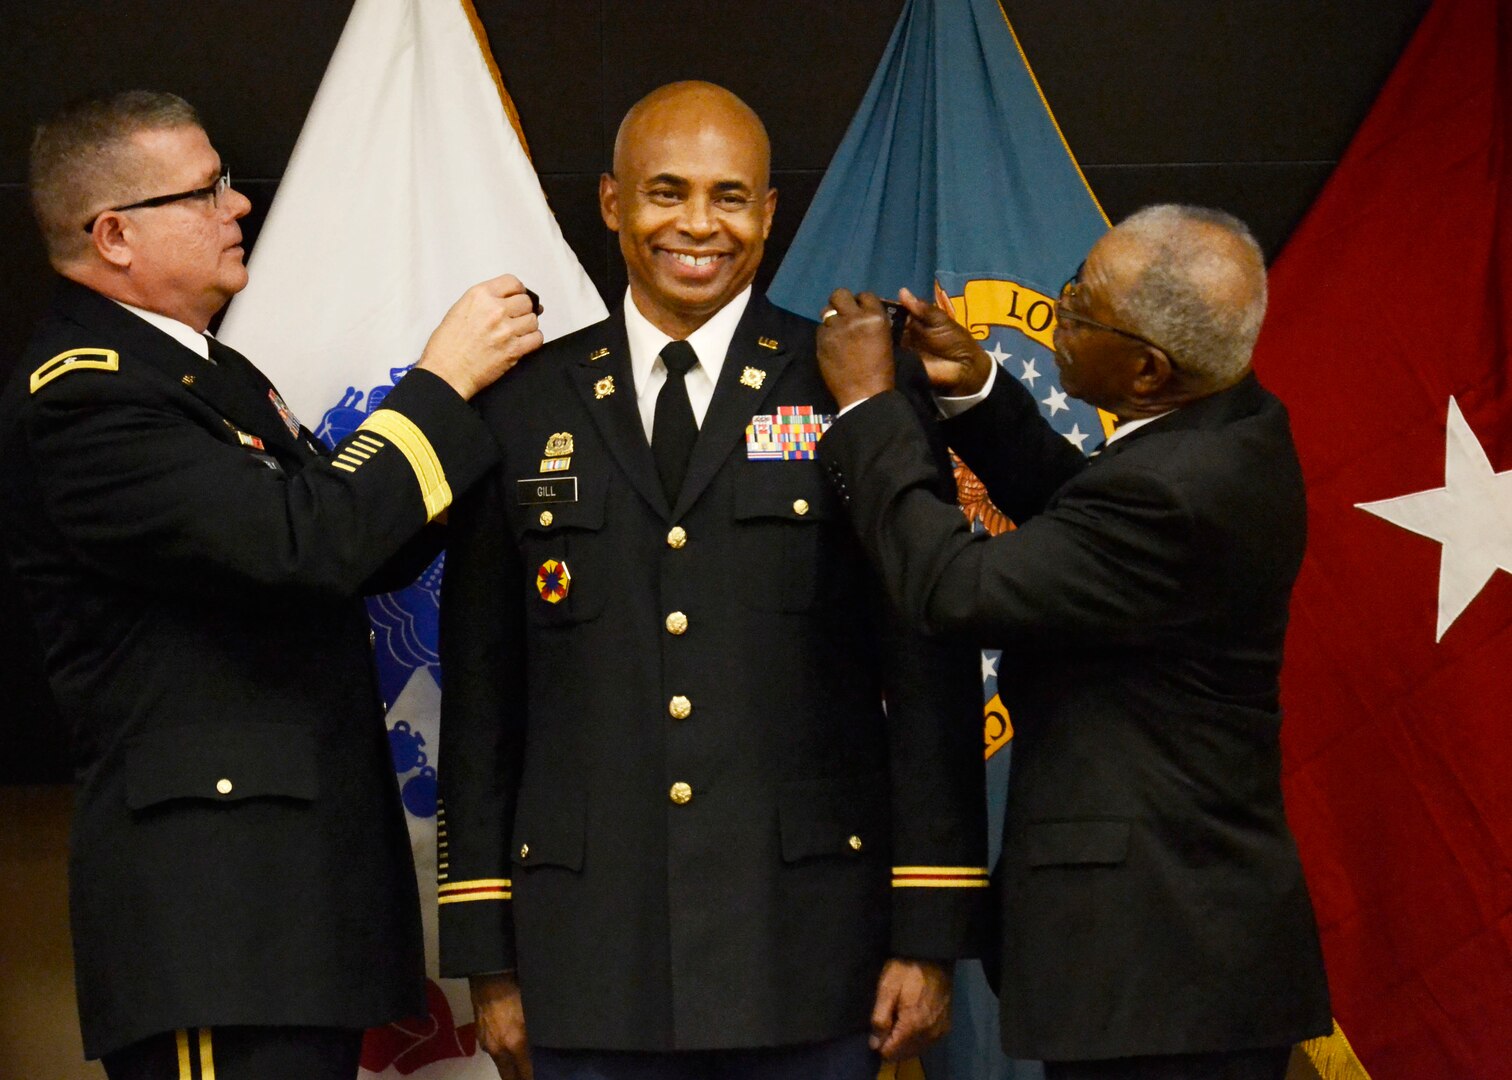 DLA Troop Support Commander Army Brig. Gen. Mark Simerly, left, places Army Col. James G. Gill’s, center, new colonel rank onto his uniform, along with Gill’s cousin Steve Peay during a promotion ceremony at DLA Troop Support in Philadelphia December 1, 2017. Gill is DLA Troop Support’s new Joint Reserves Forces team lead, joining the organization in November.